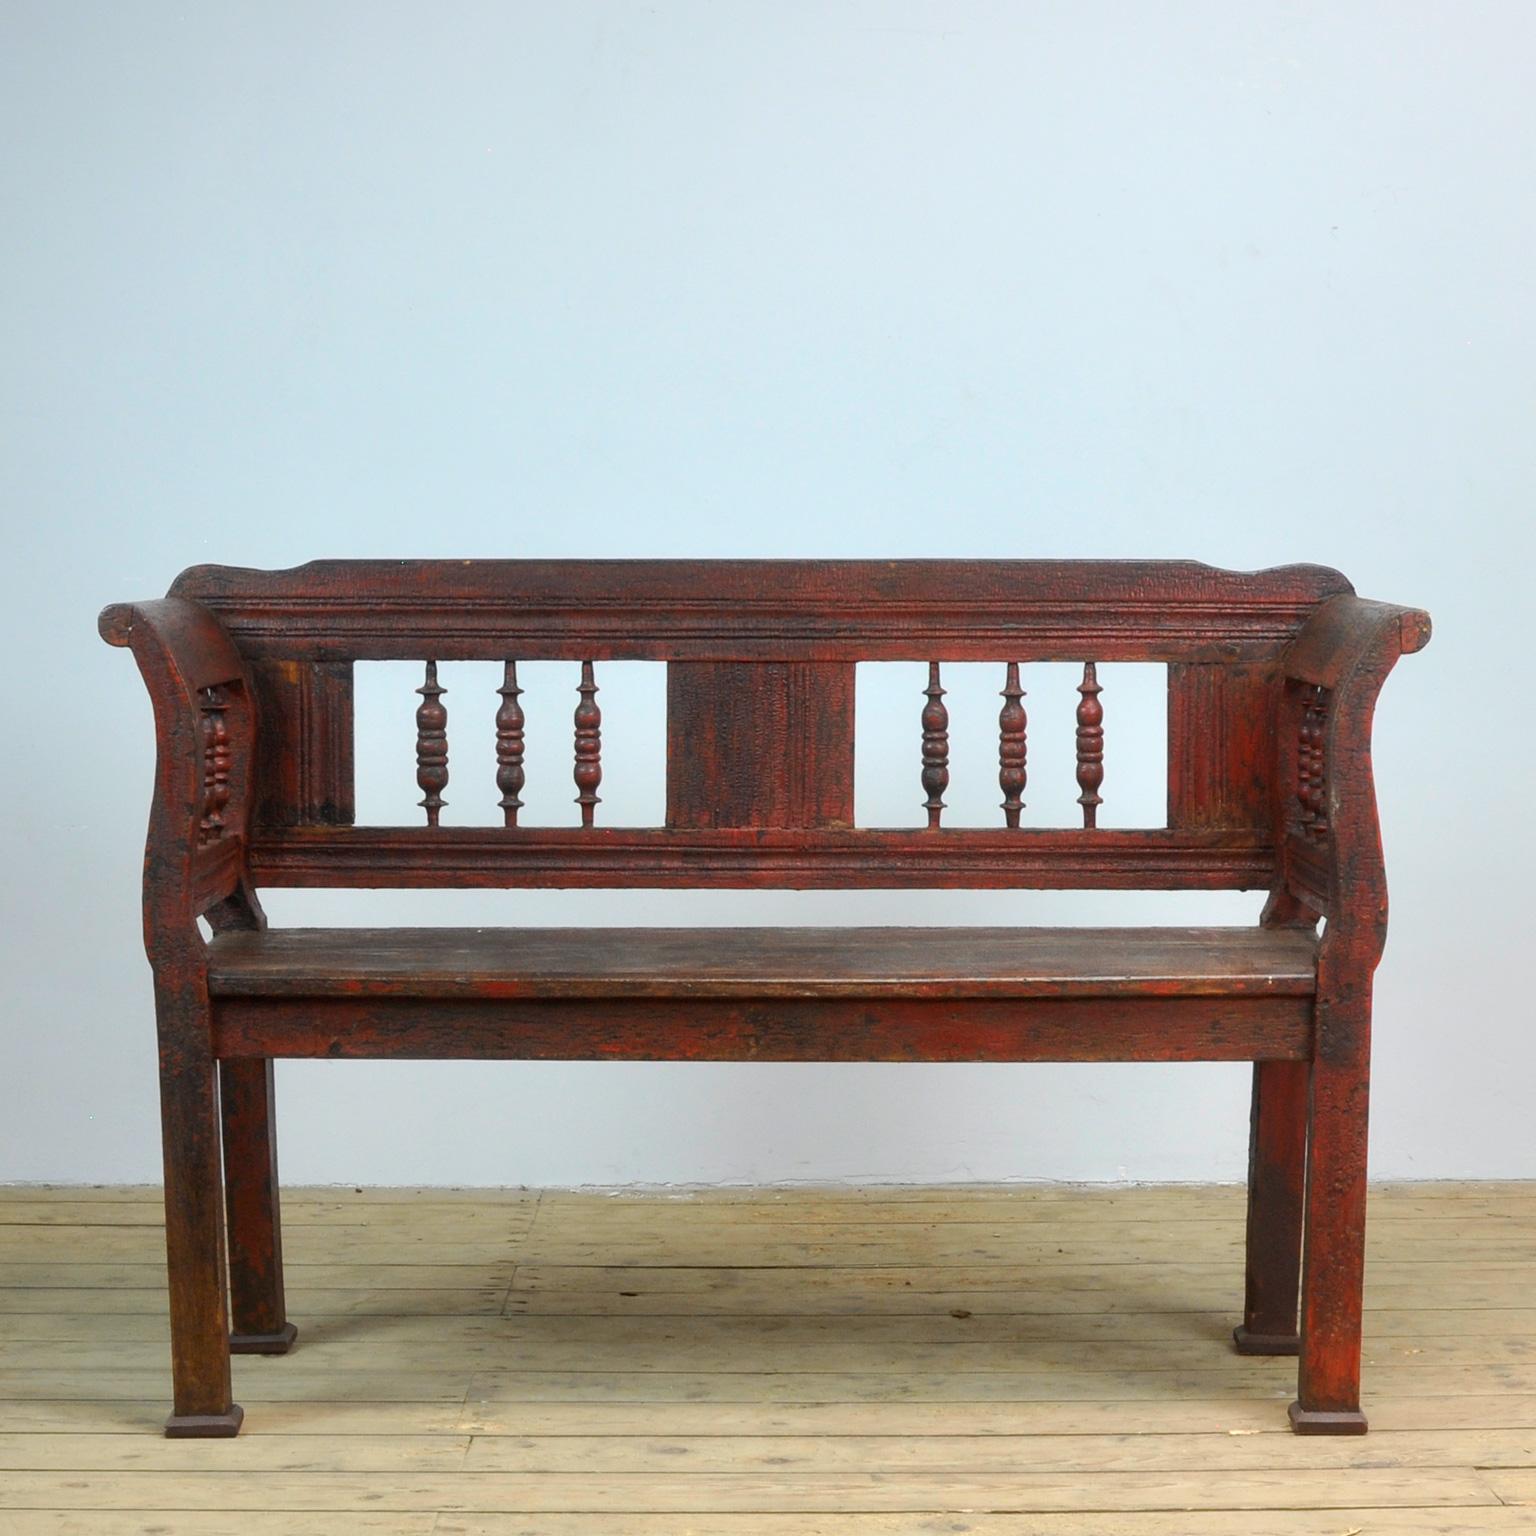 A charming bench from Hungary, painted a striking shade of red with great patina. Original paint.